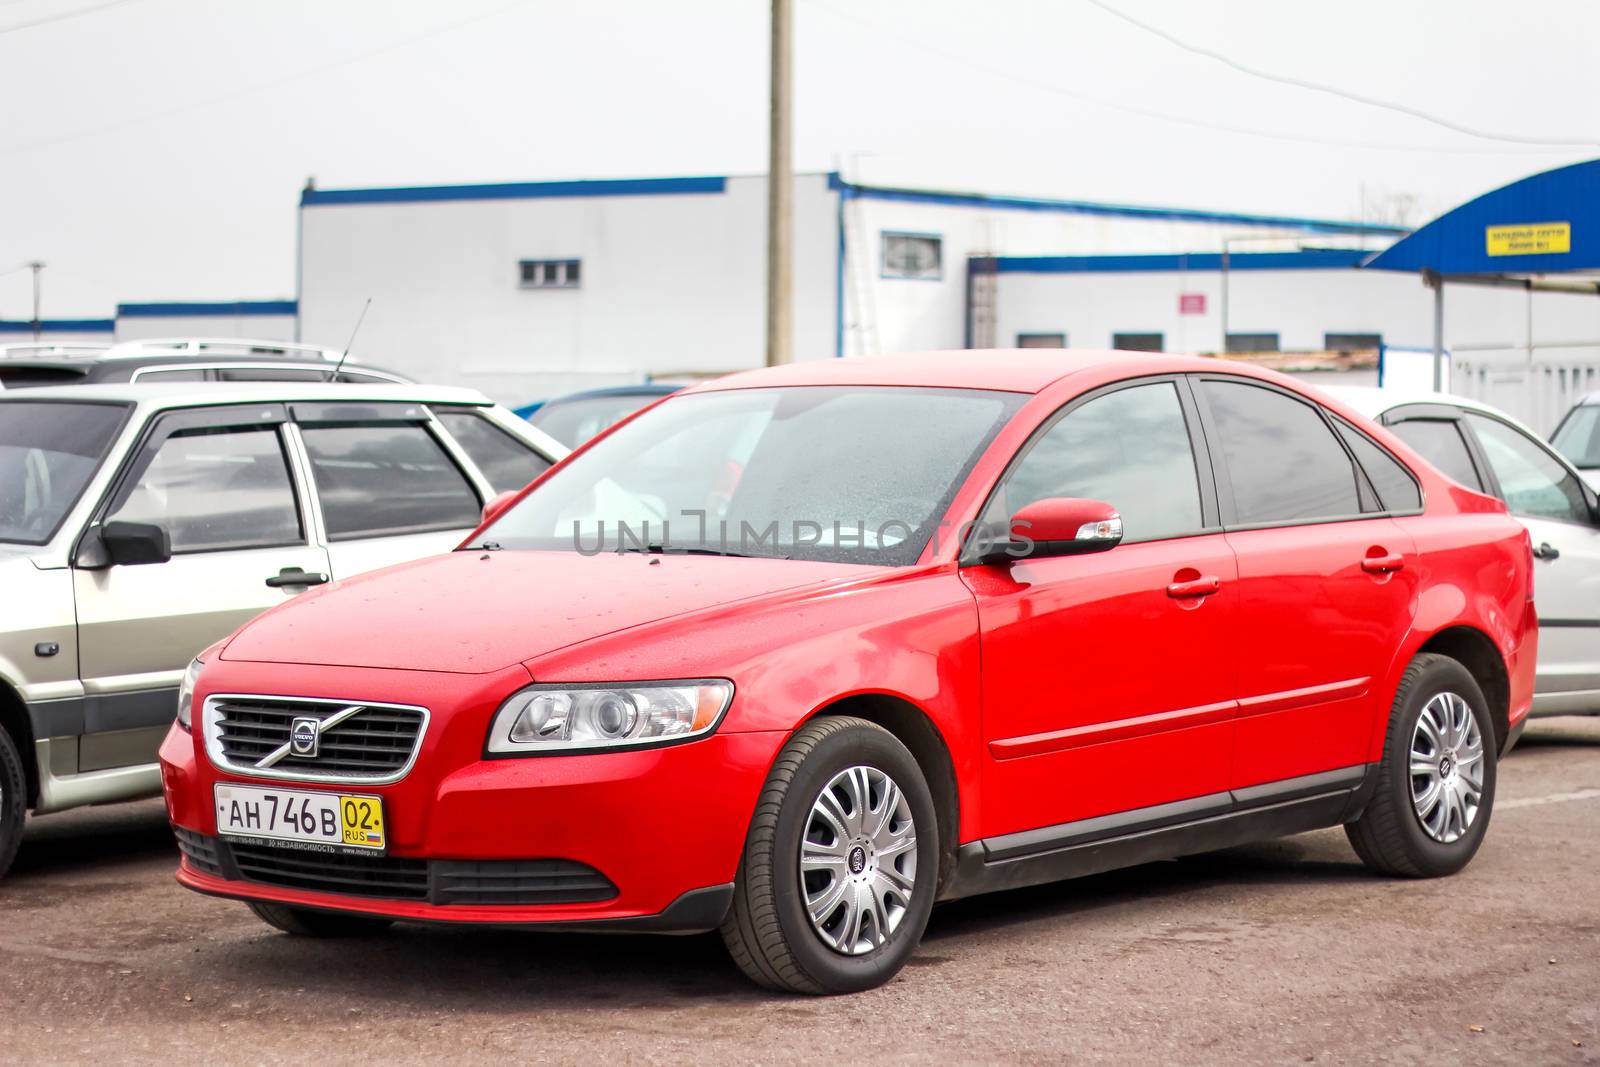 UFA, RUSSIA - APRIL 19, 2012: Motor car Volvo S40 at the used cars trade center.